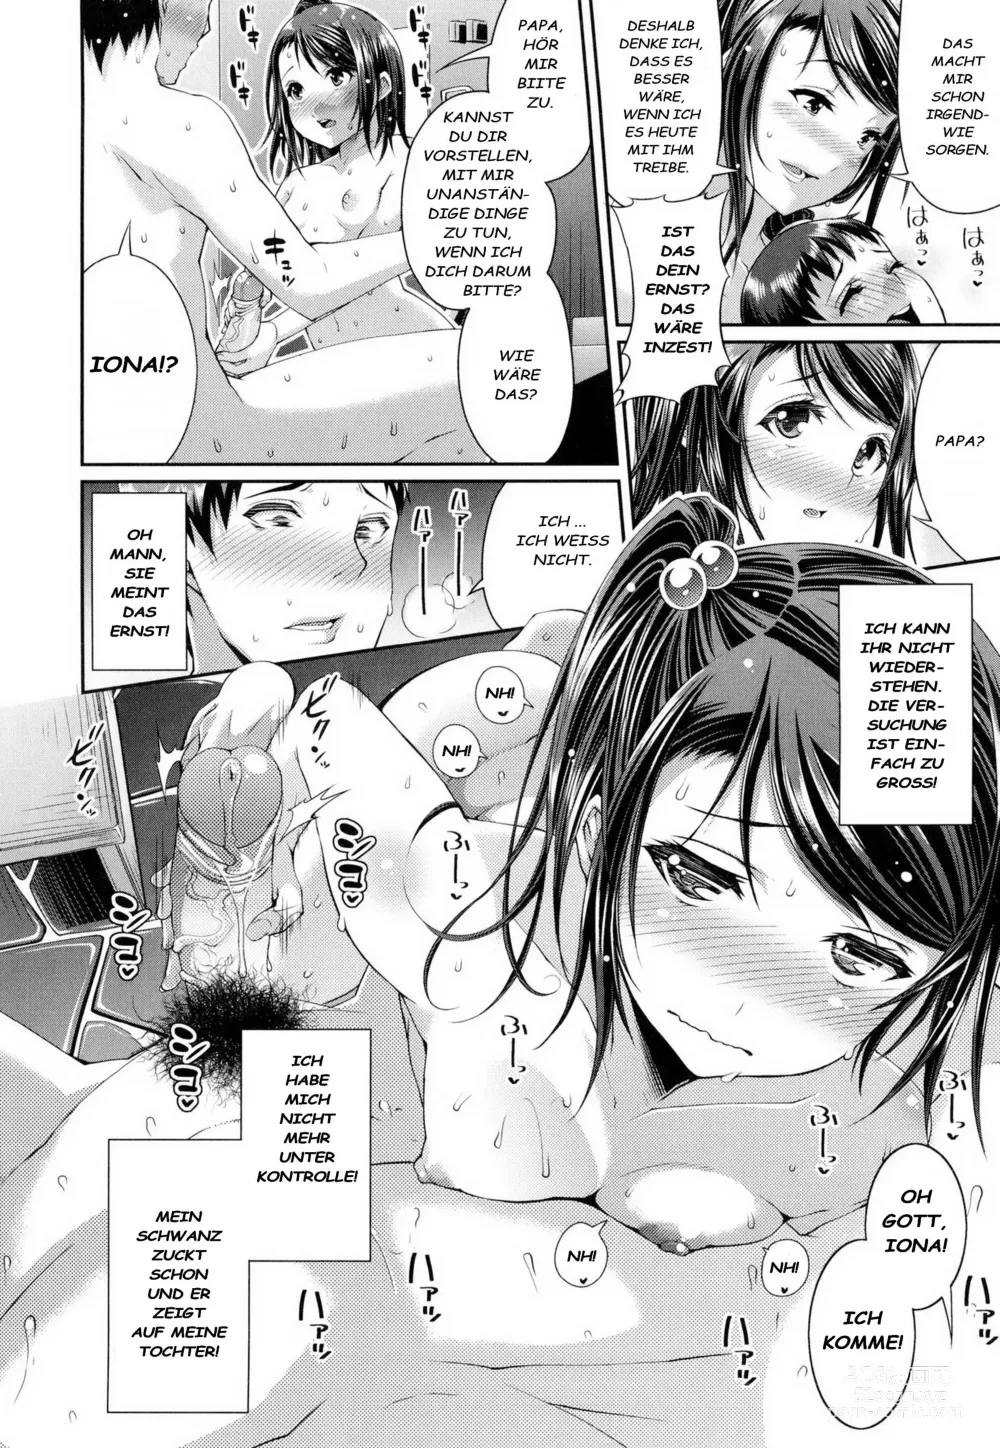 Page 14 of manga Step Child Swapping (decensored)